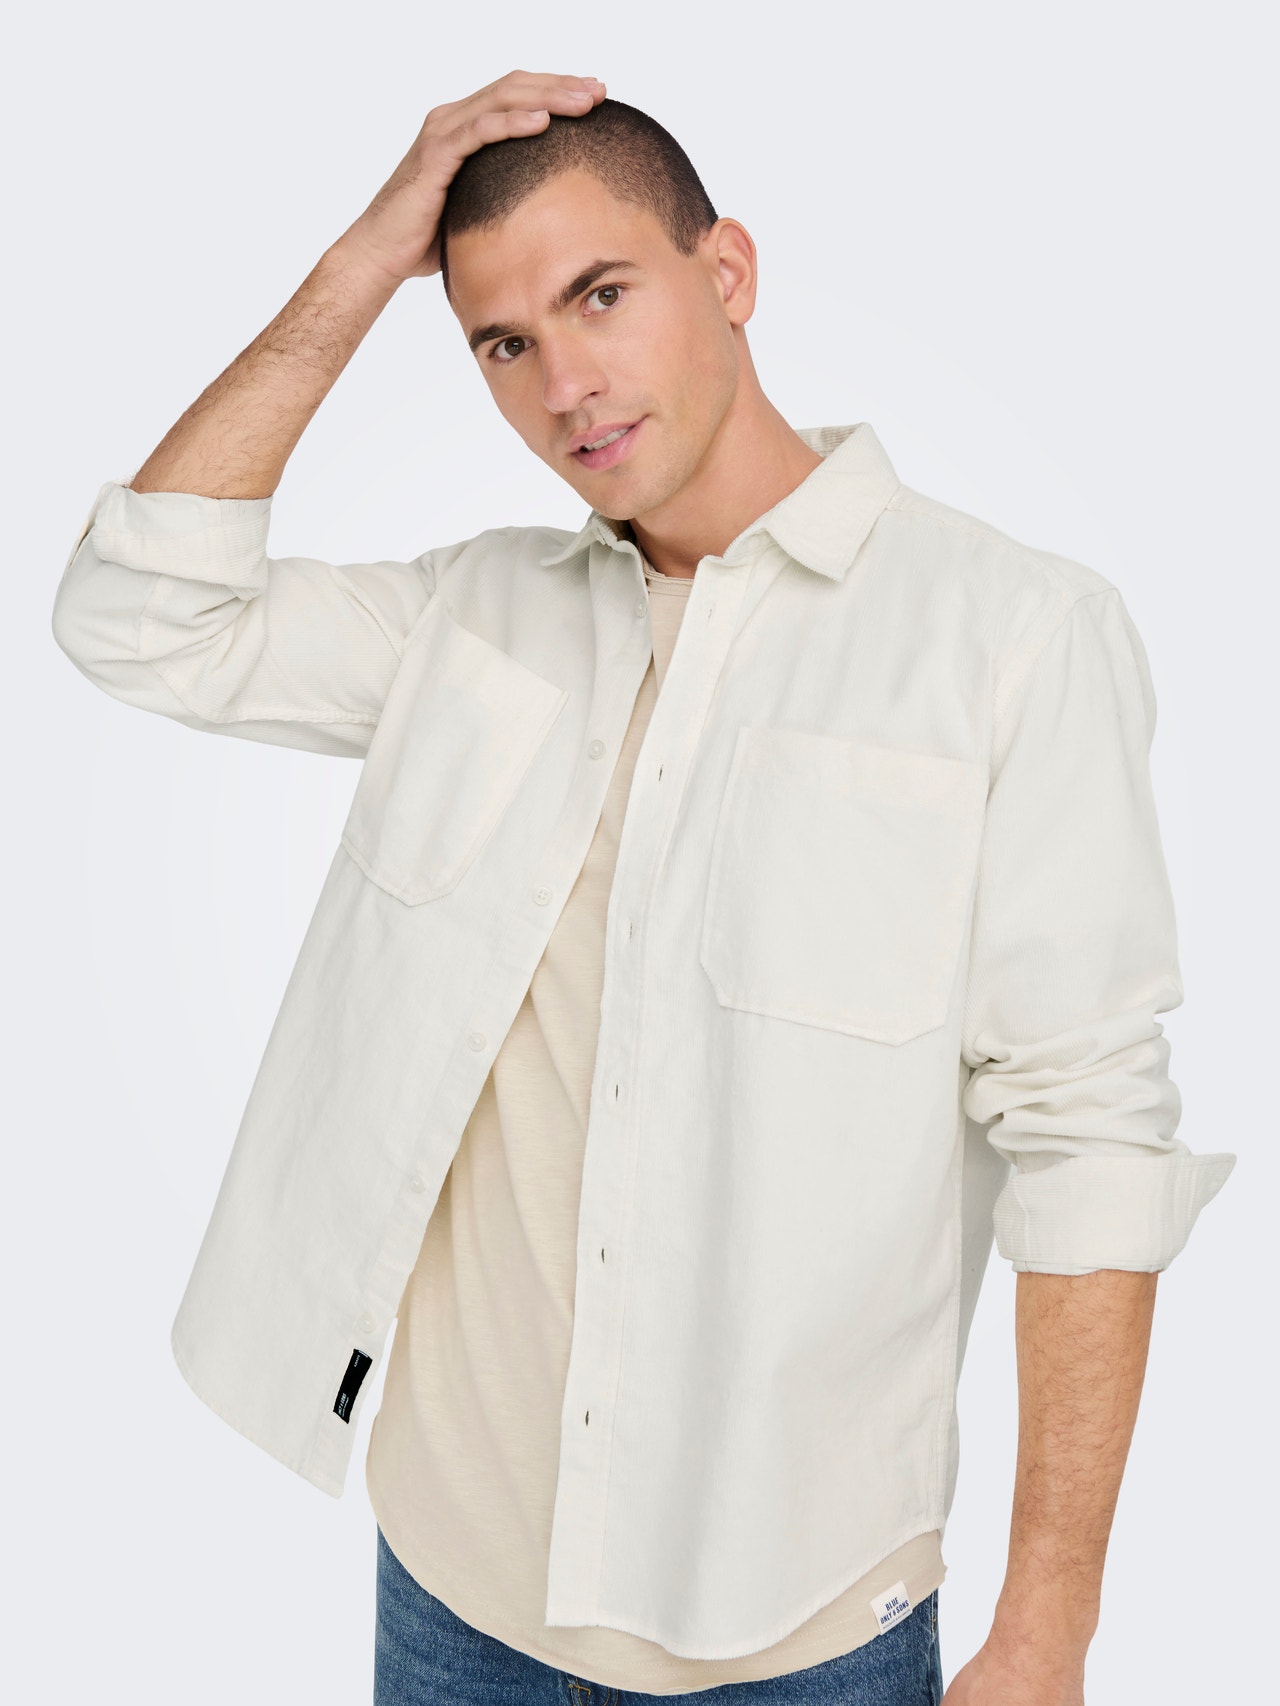 ONLY & SONS Camisas Corte relaxed Cuello de camisa -Cloud Dancer - 22024716